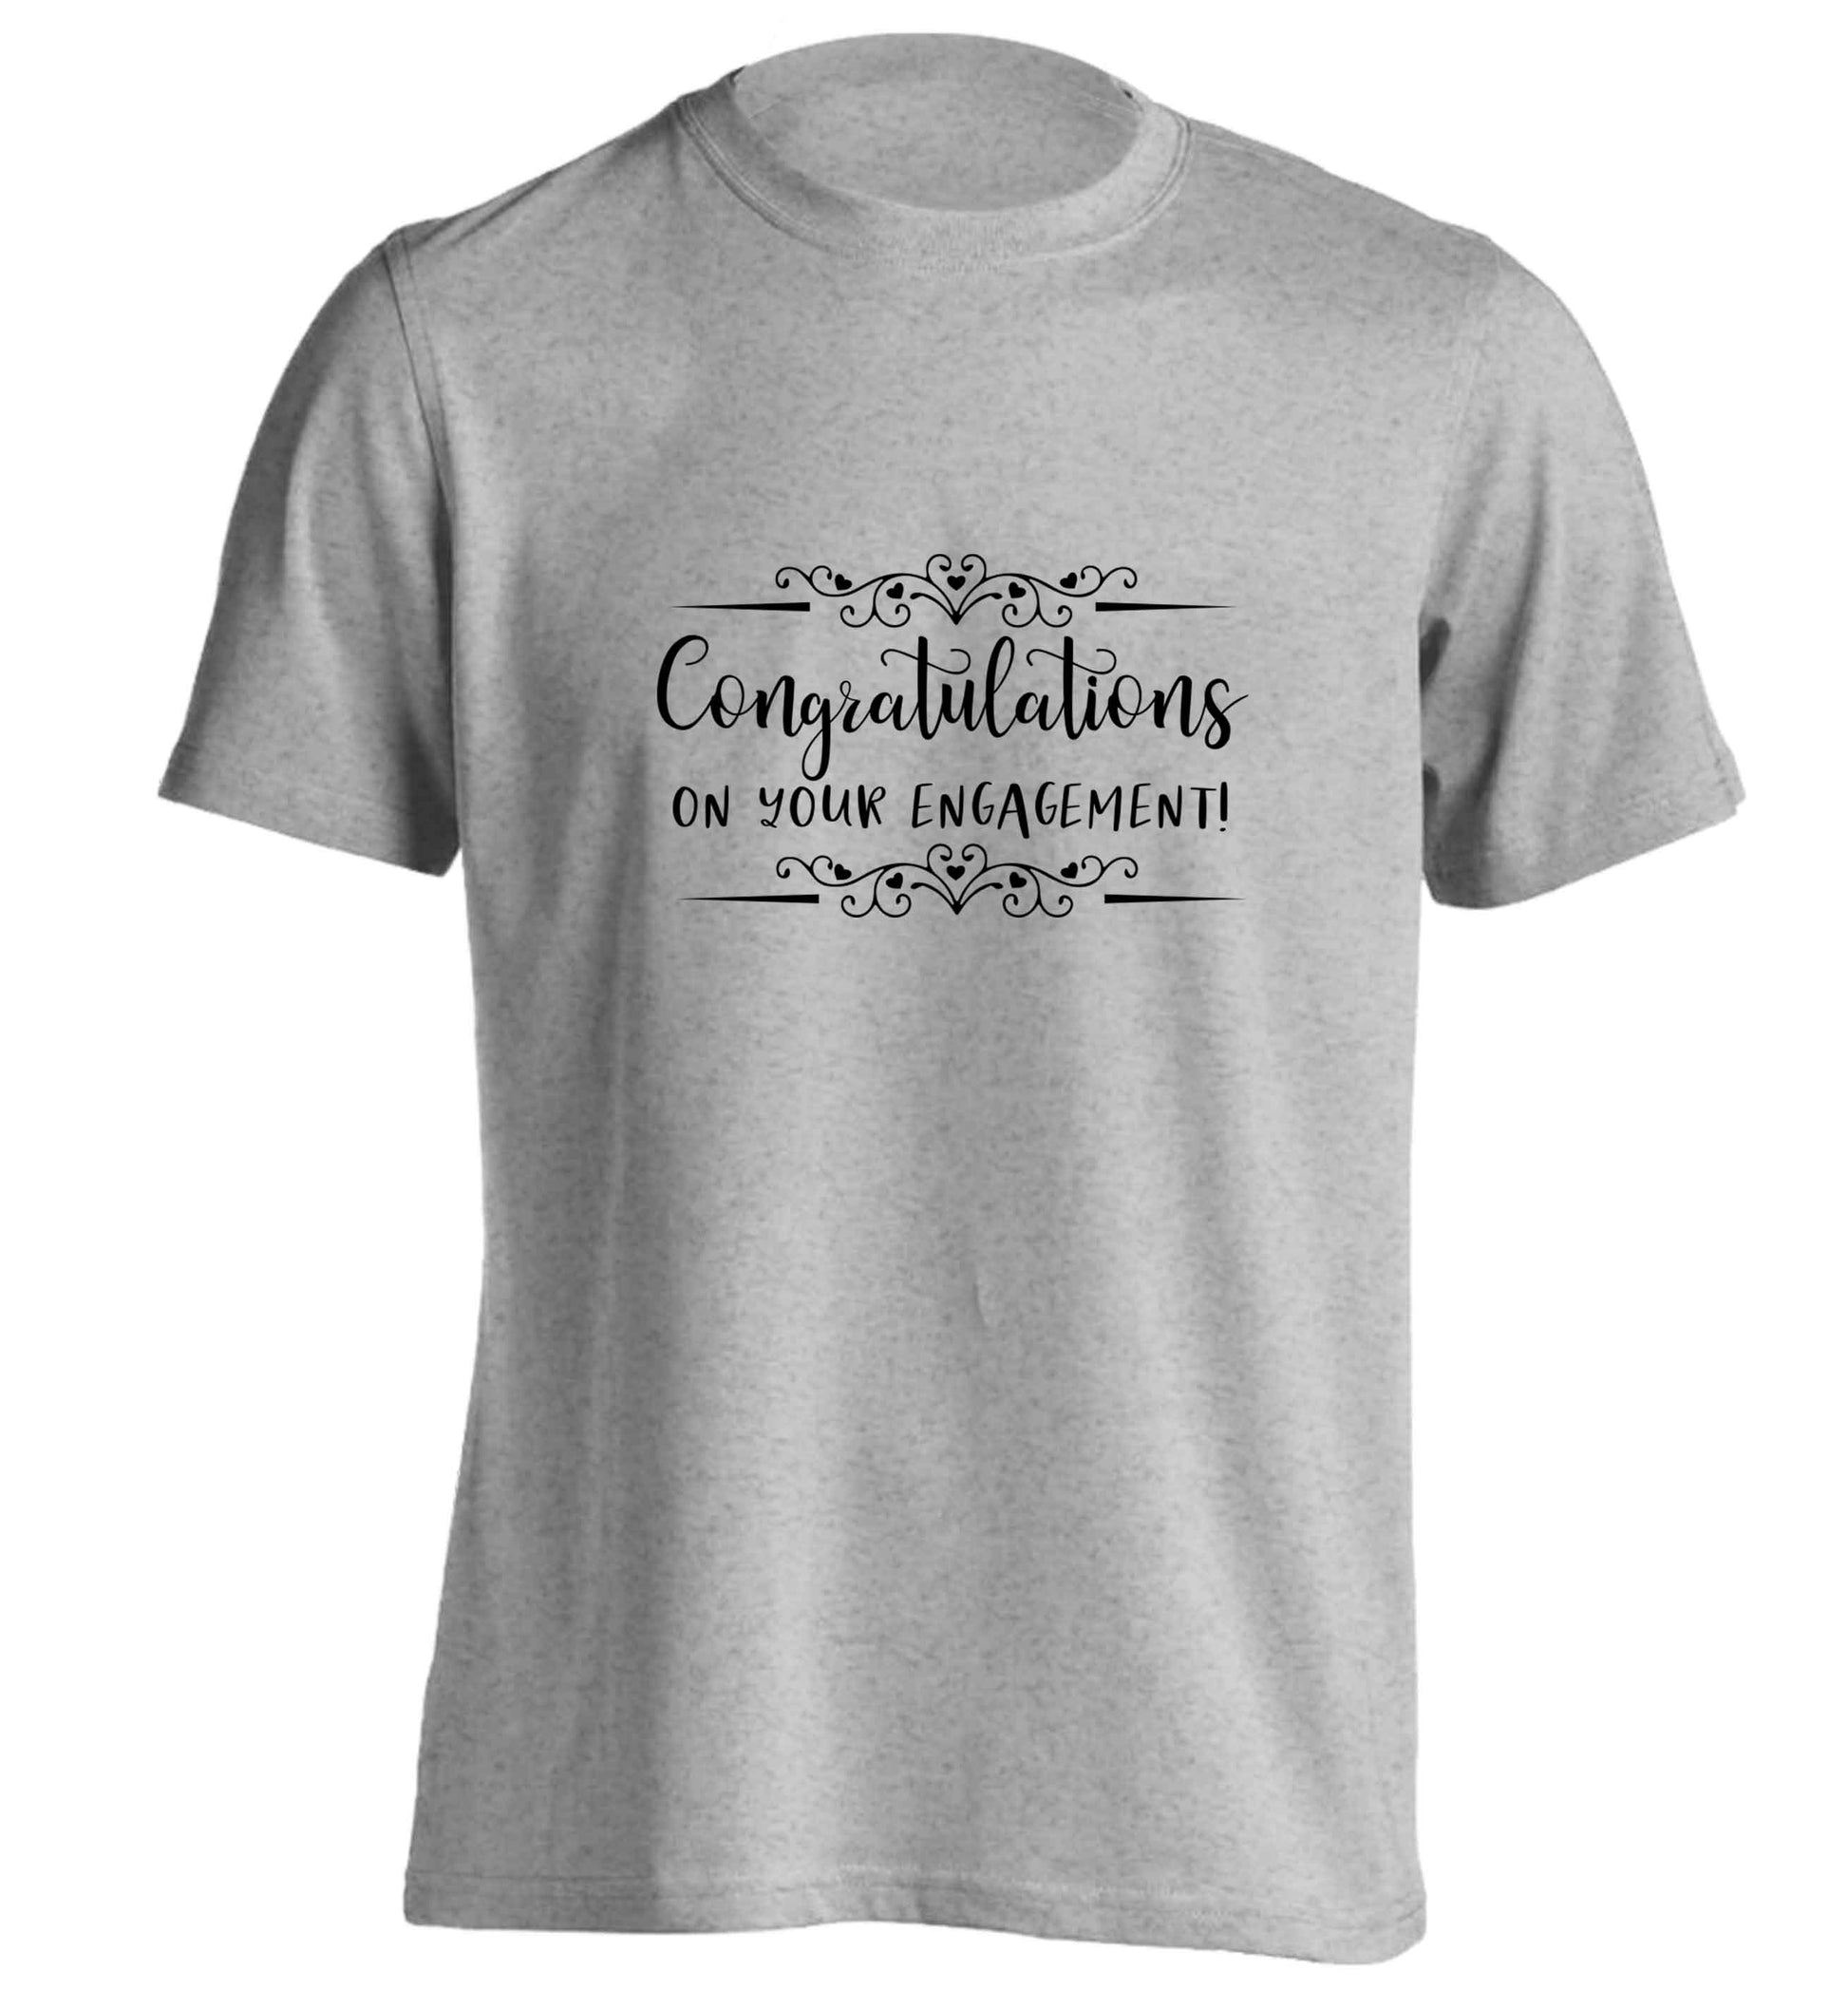 Congratulations on your engagement adults unisex grey Tshirt 2XL